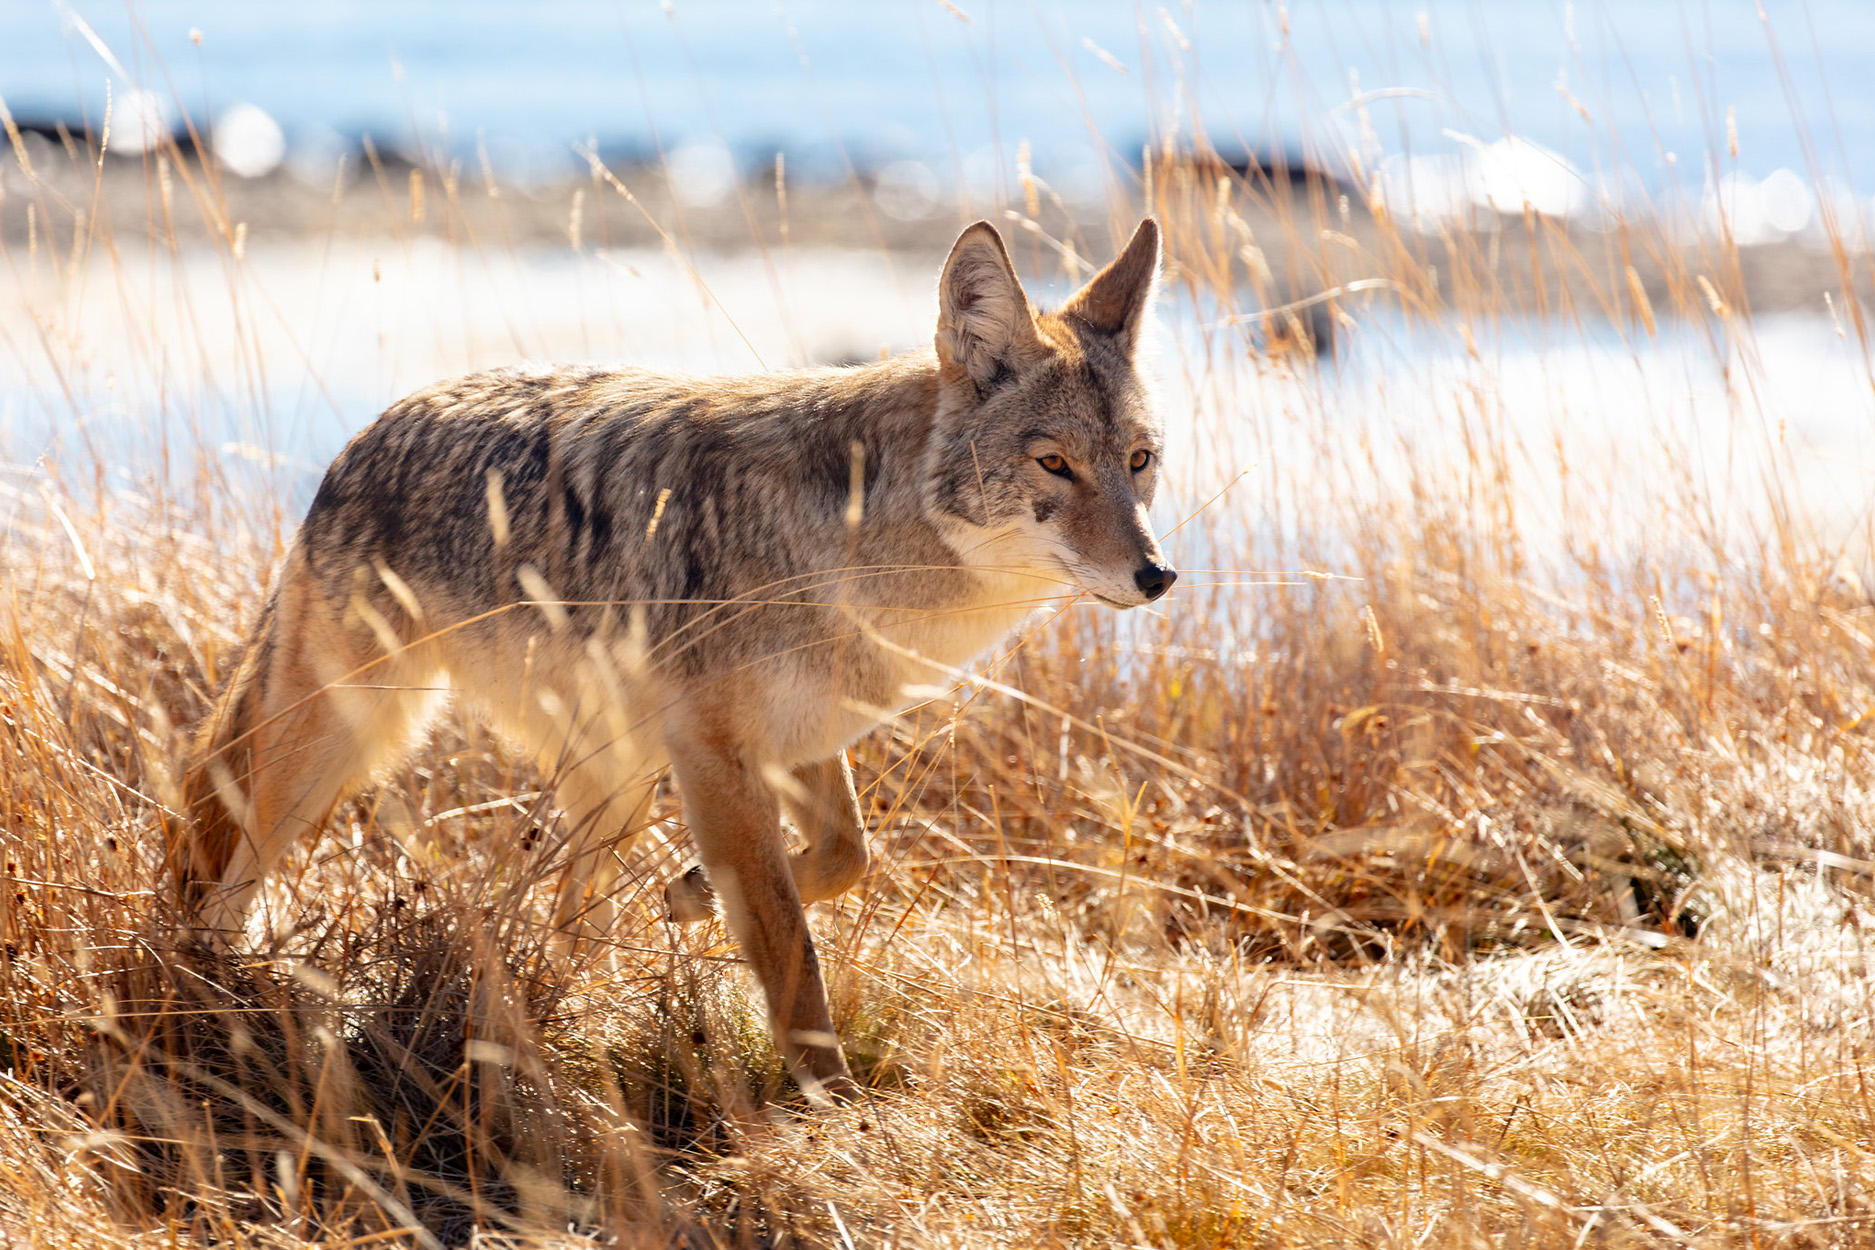 A Western coyote in Yellowstone National Park.